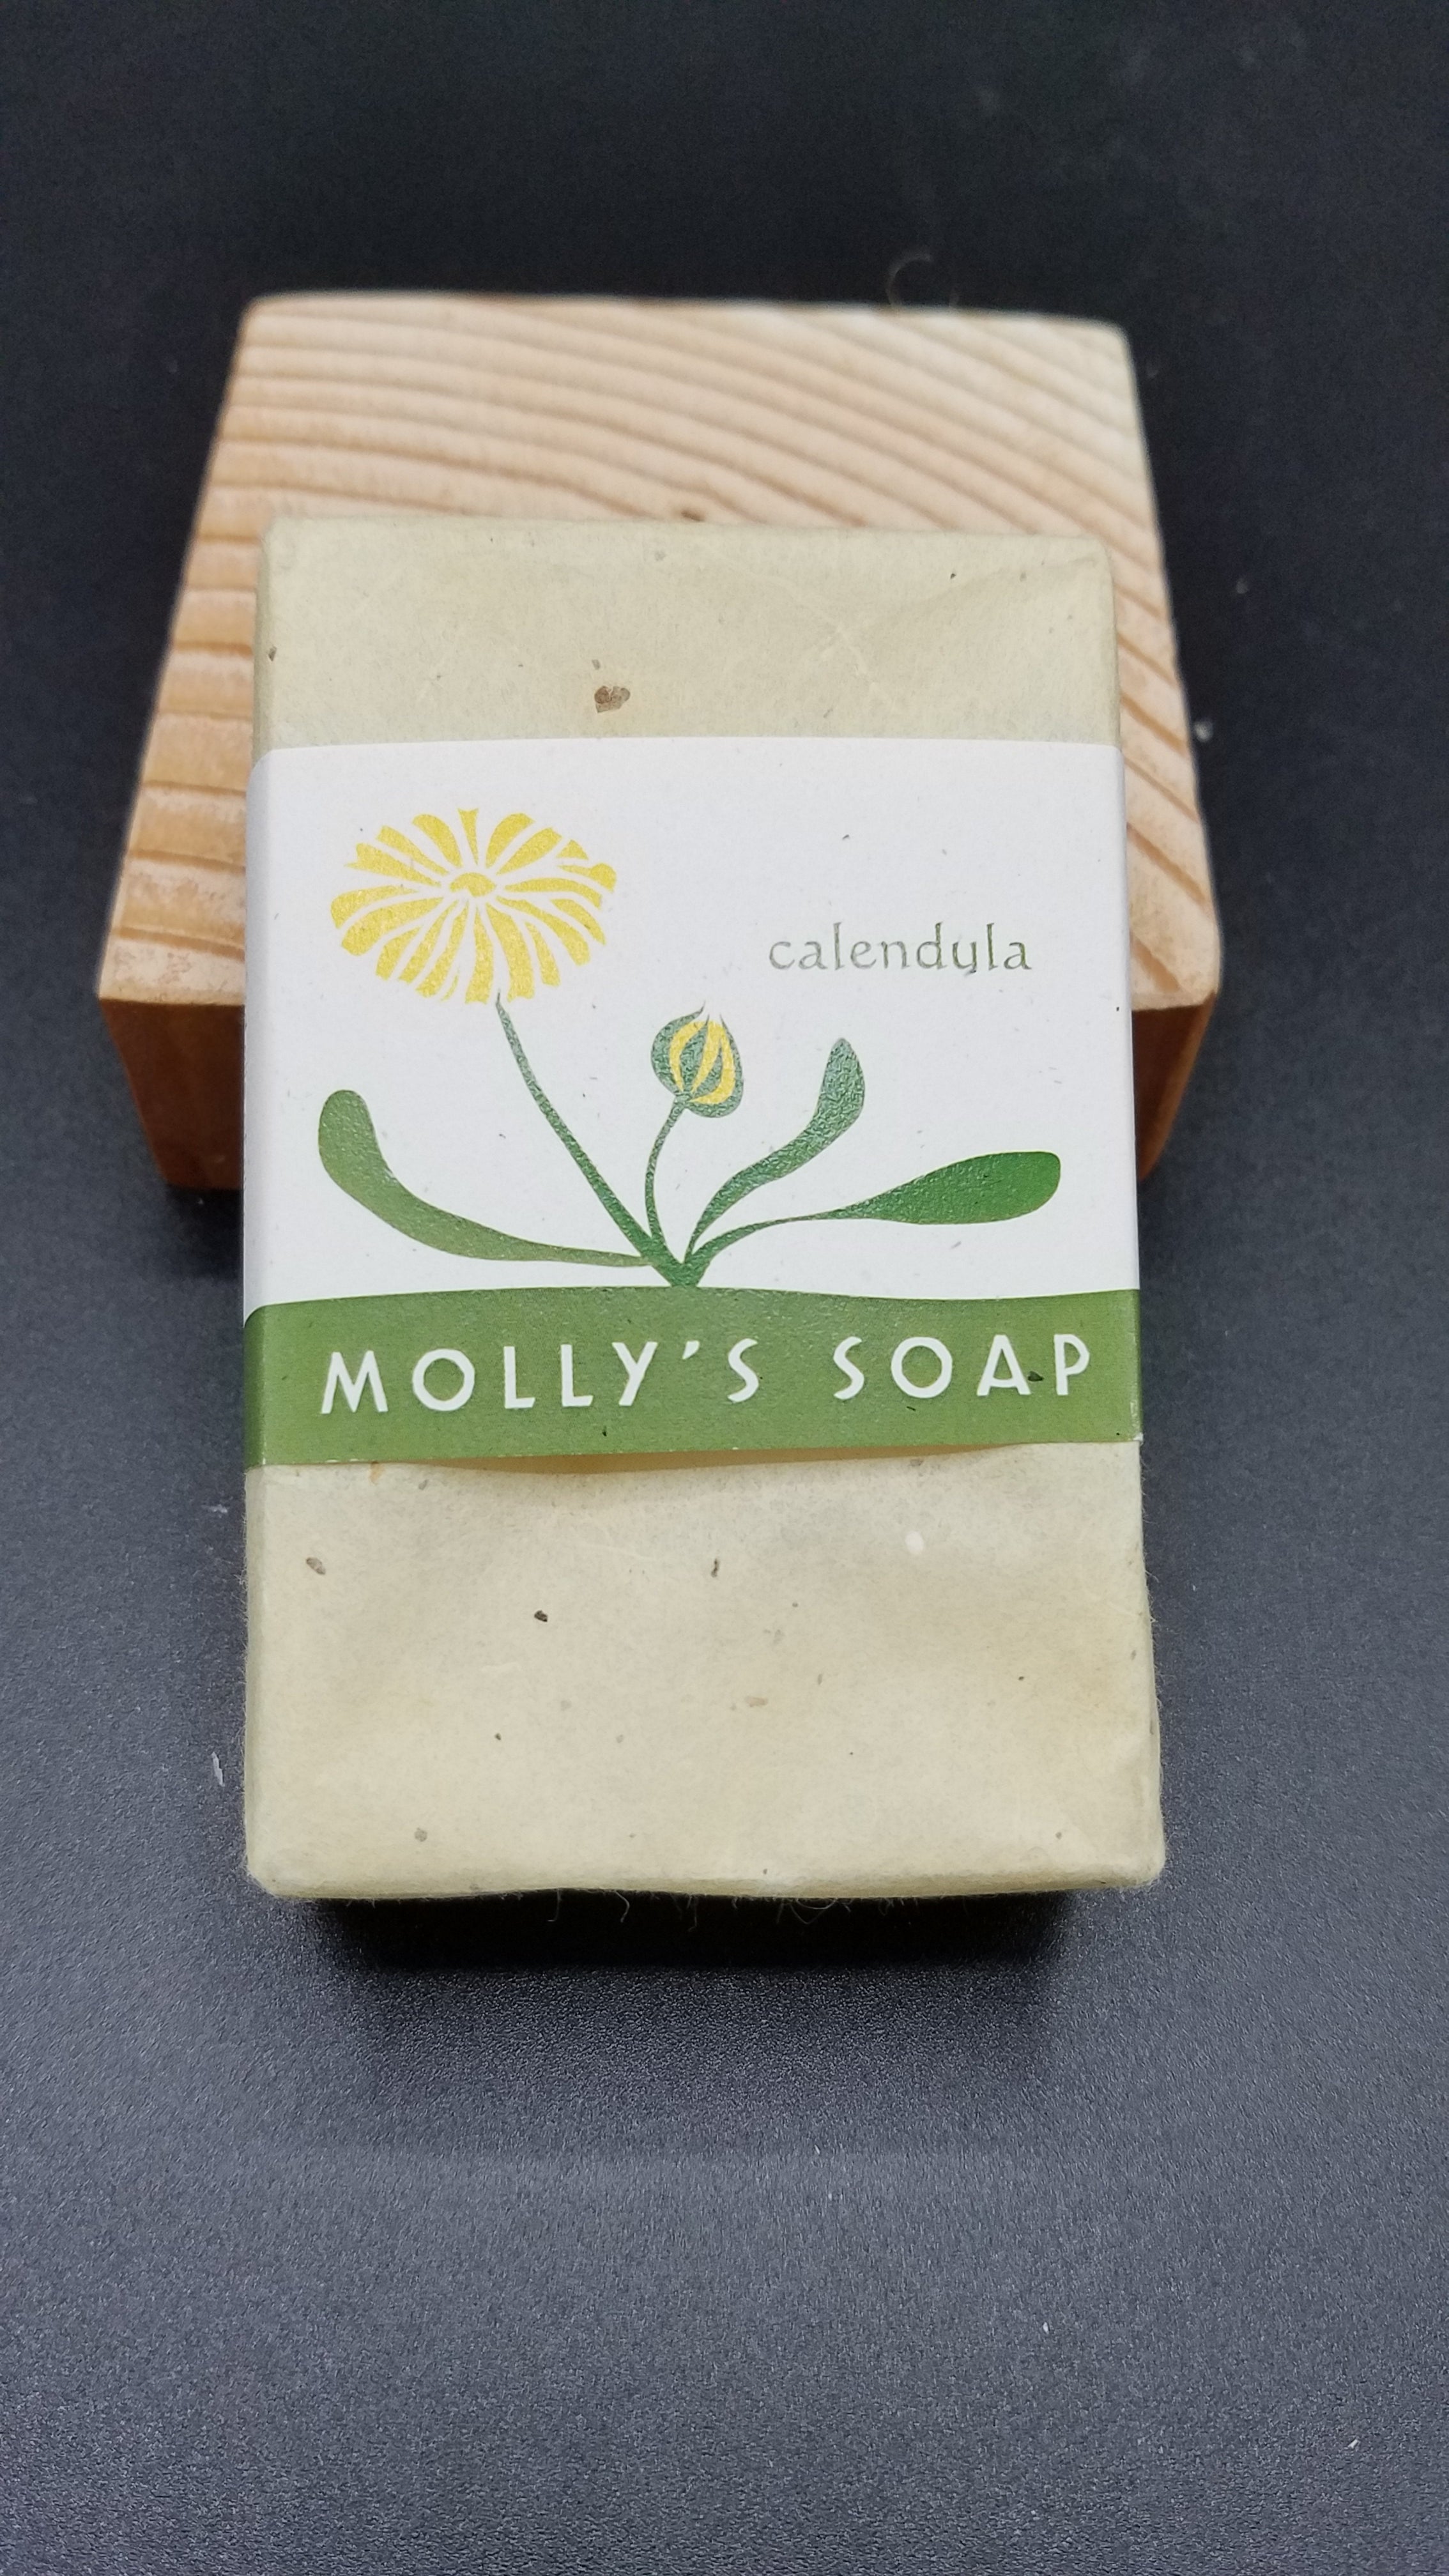 Molly's Soap - Assorted Bars